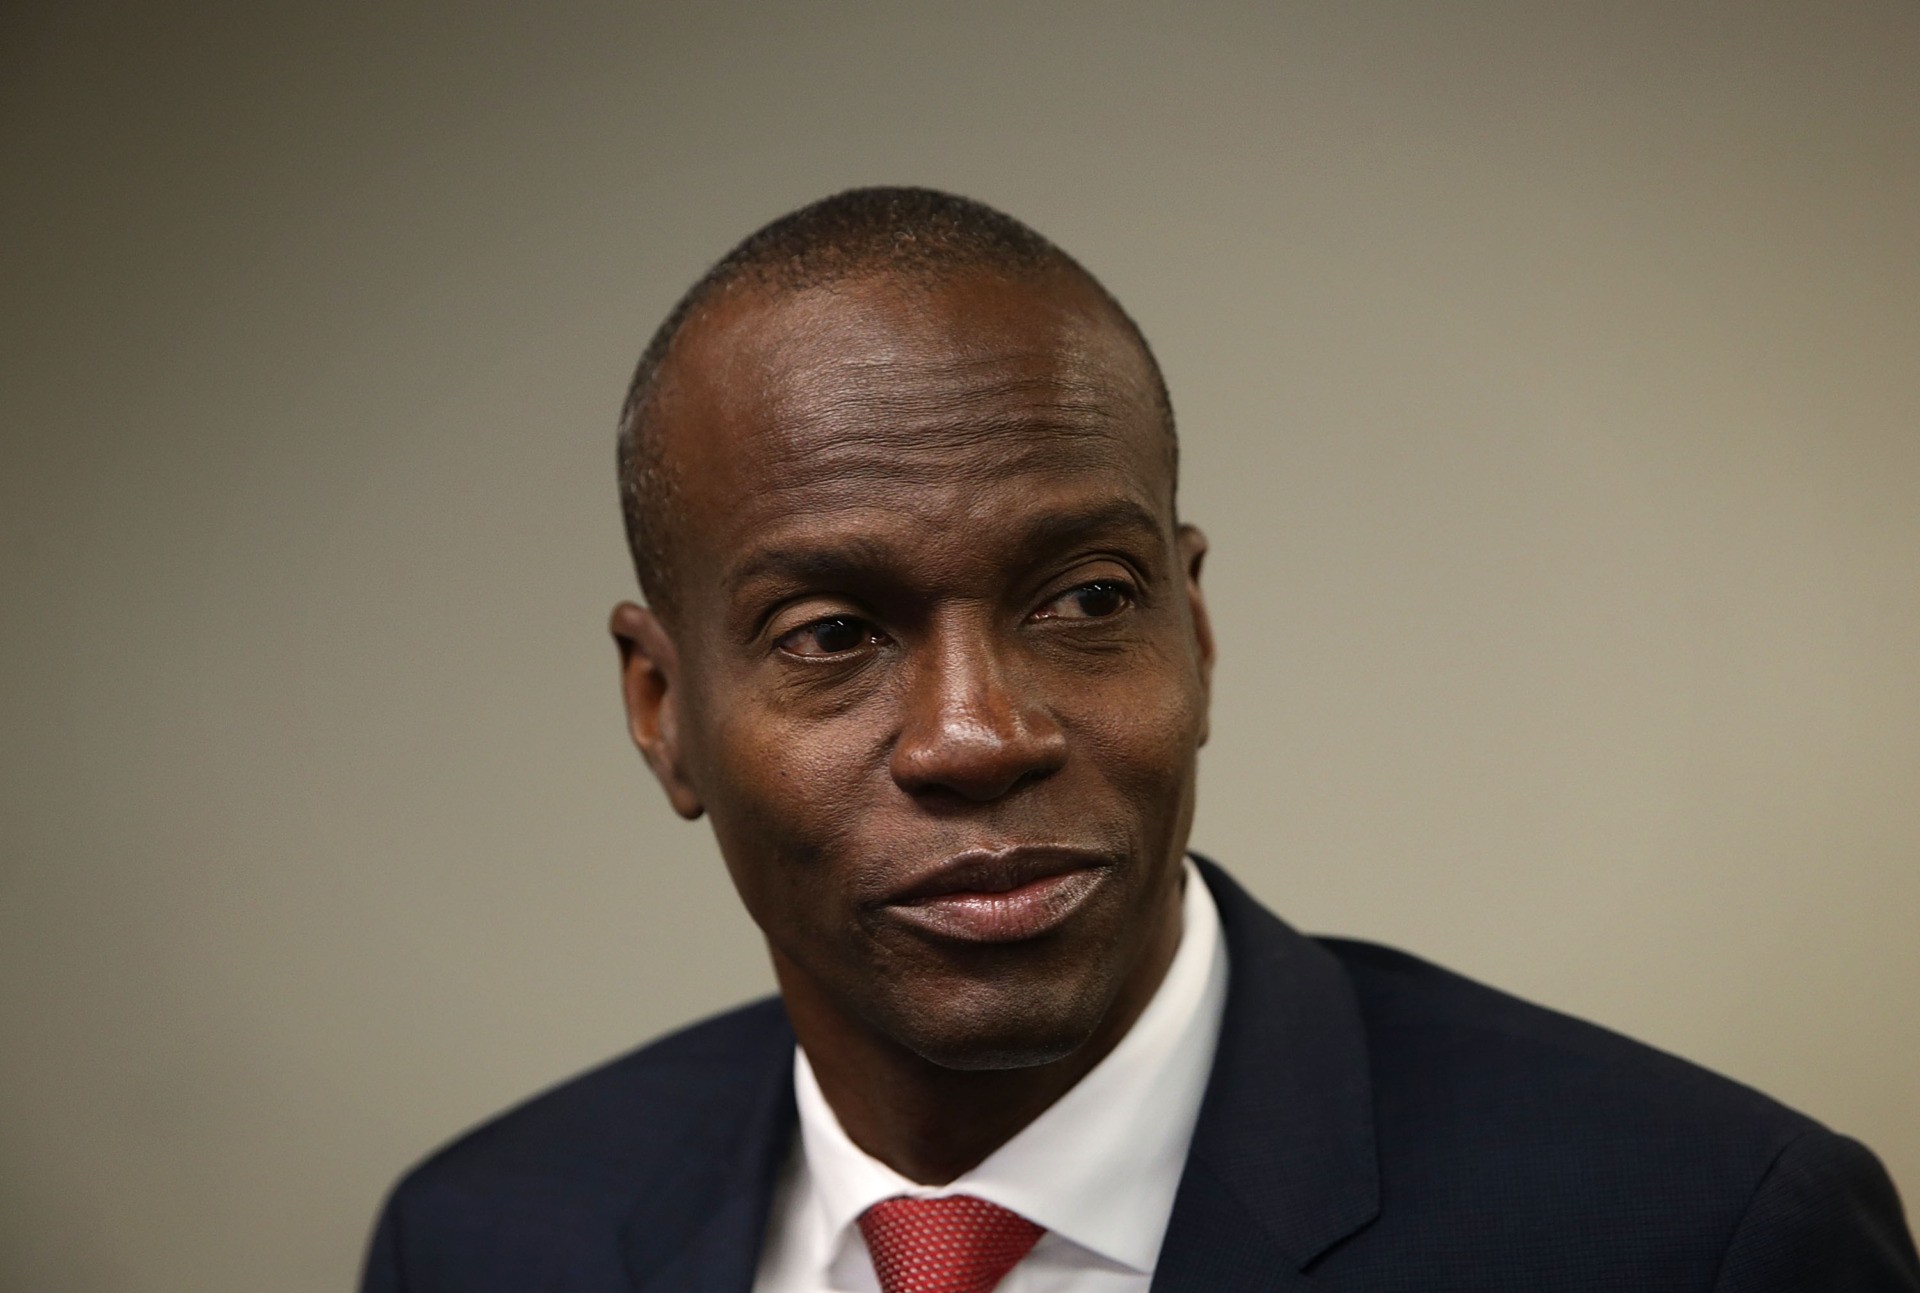 WASHINGTON, DC - APRIL 20: Haitian presidential candidate Jovenel Moise arrives at the National Press Club April 20, 2016 in Washington, DC. (Photo by Alex Wong/Getty Images)